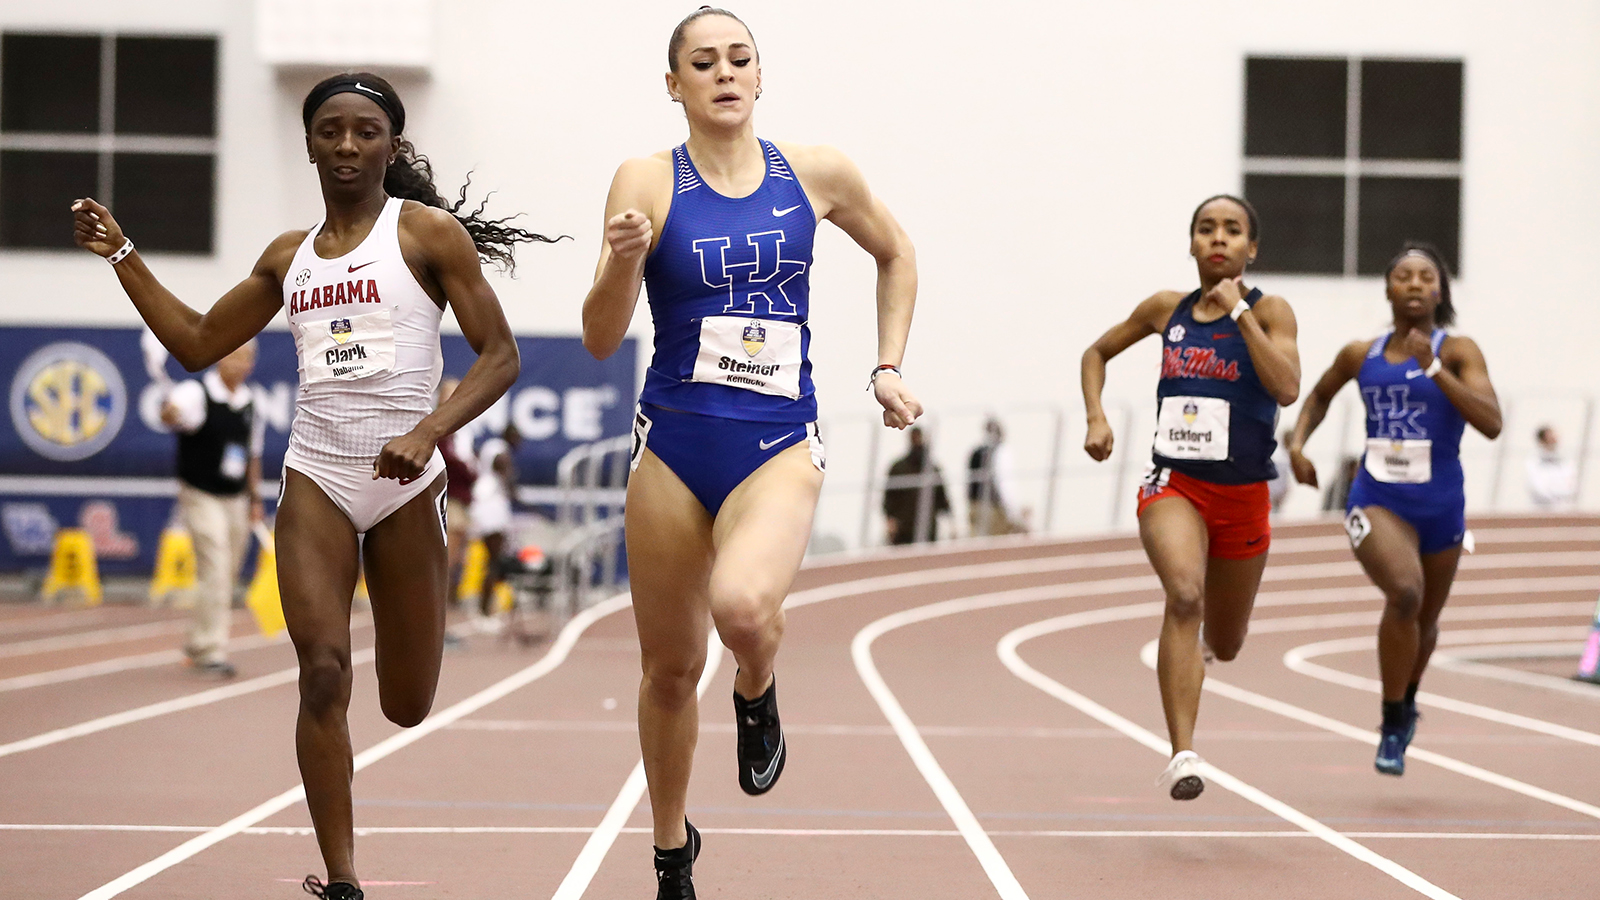 Steiner Wins Three Times, Improves Nation’s Best Time in the 200